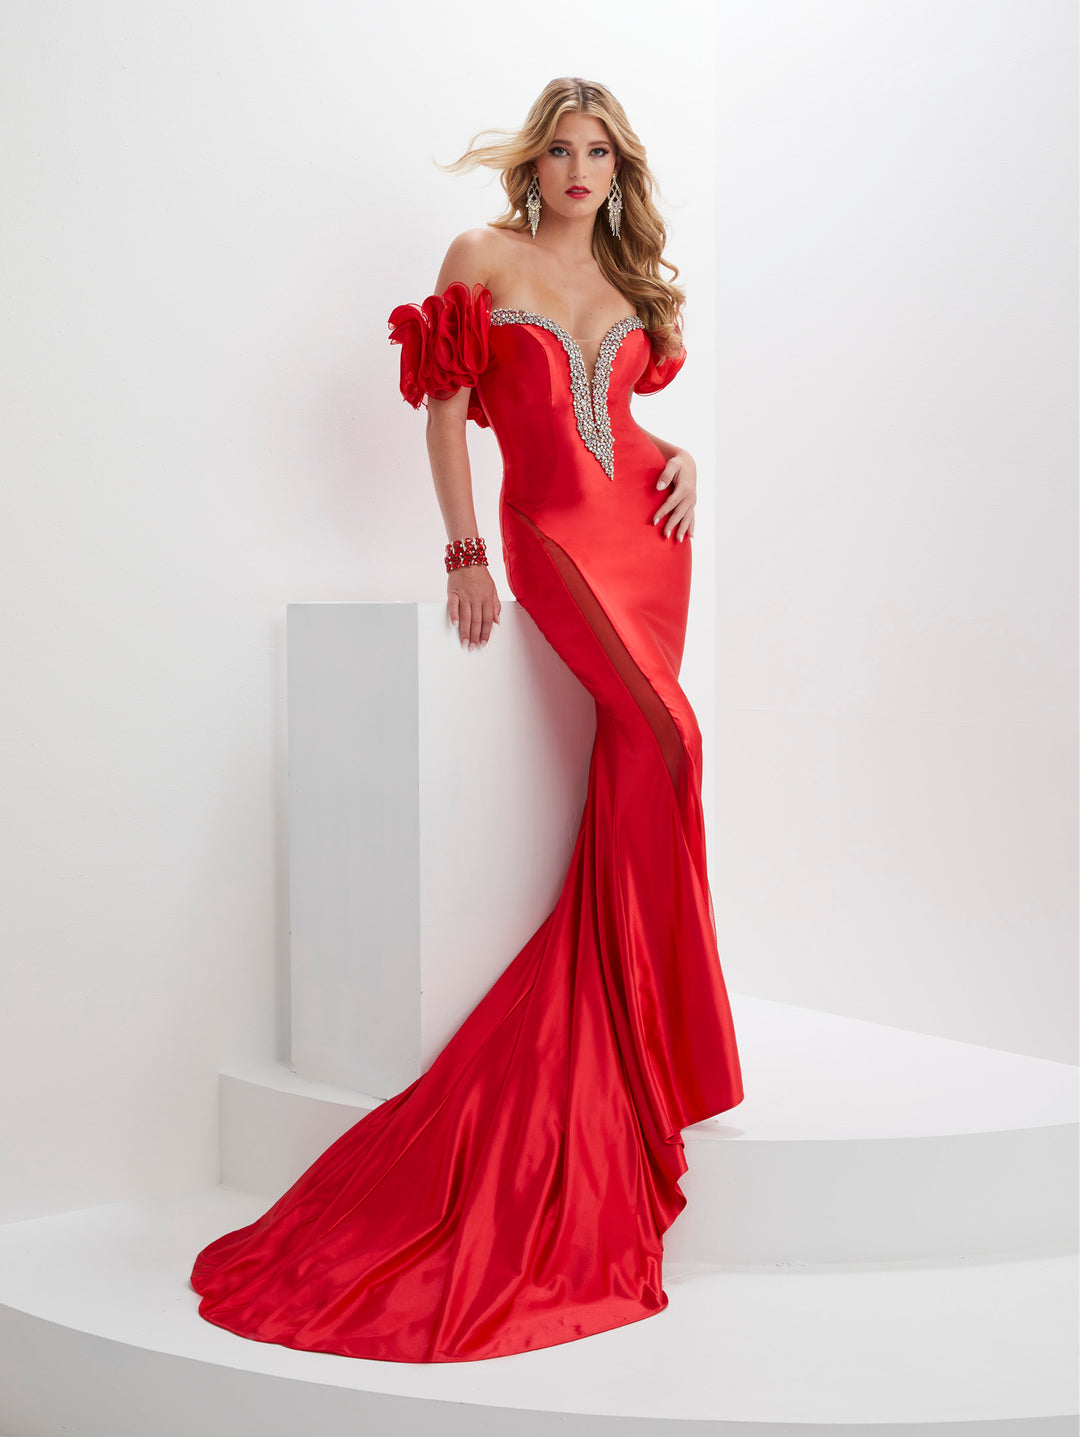 Beaded Satin Off Shoulder Mermaid Dress by Panoply 14126